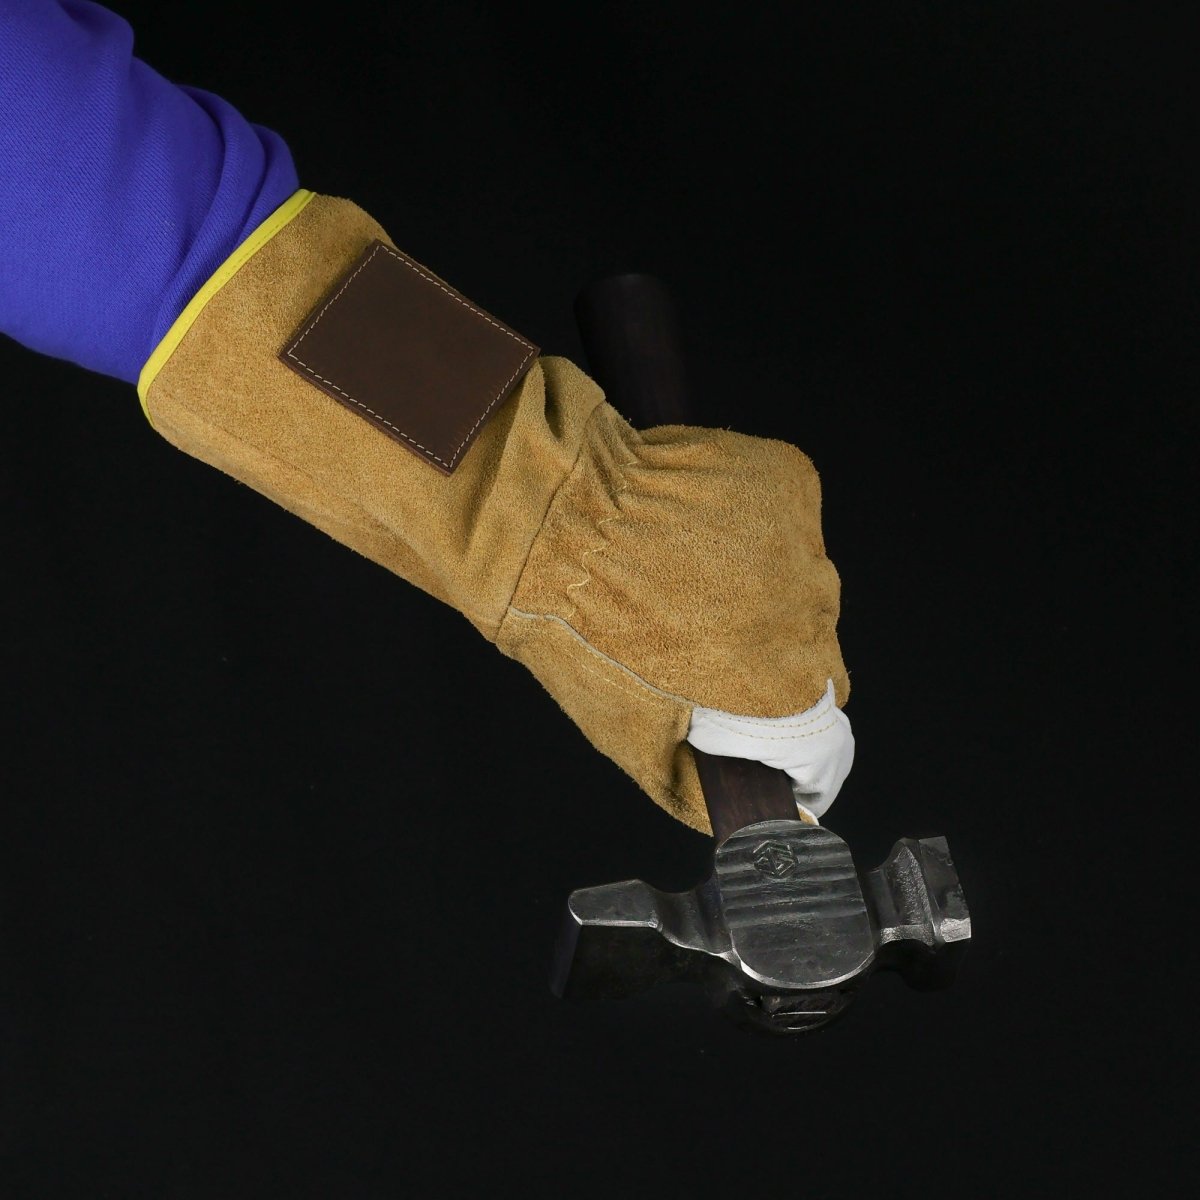 Fire resistant leather gloves for artisans - Blacksmith and welding gloves from AncientSmithy